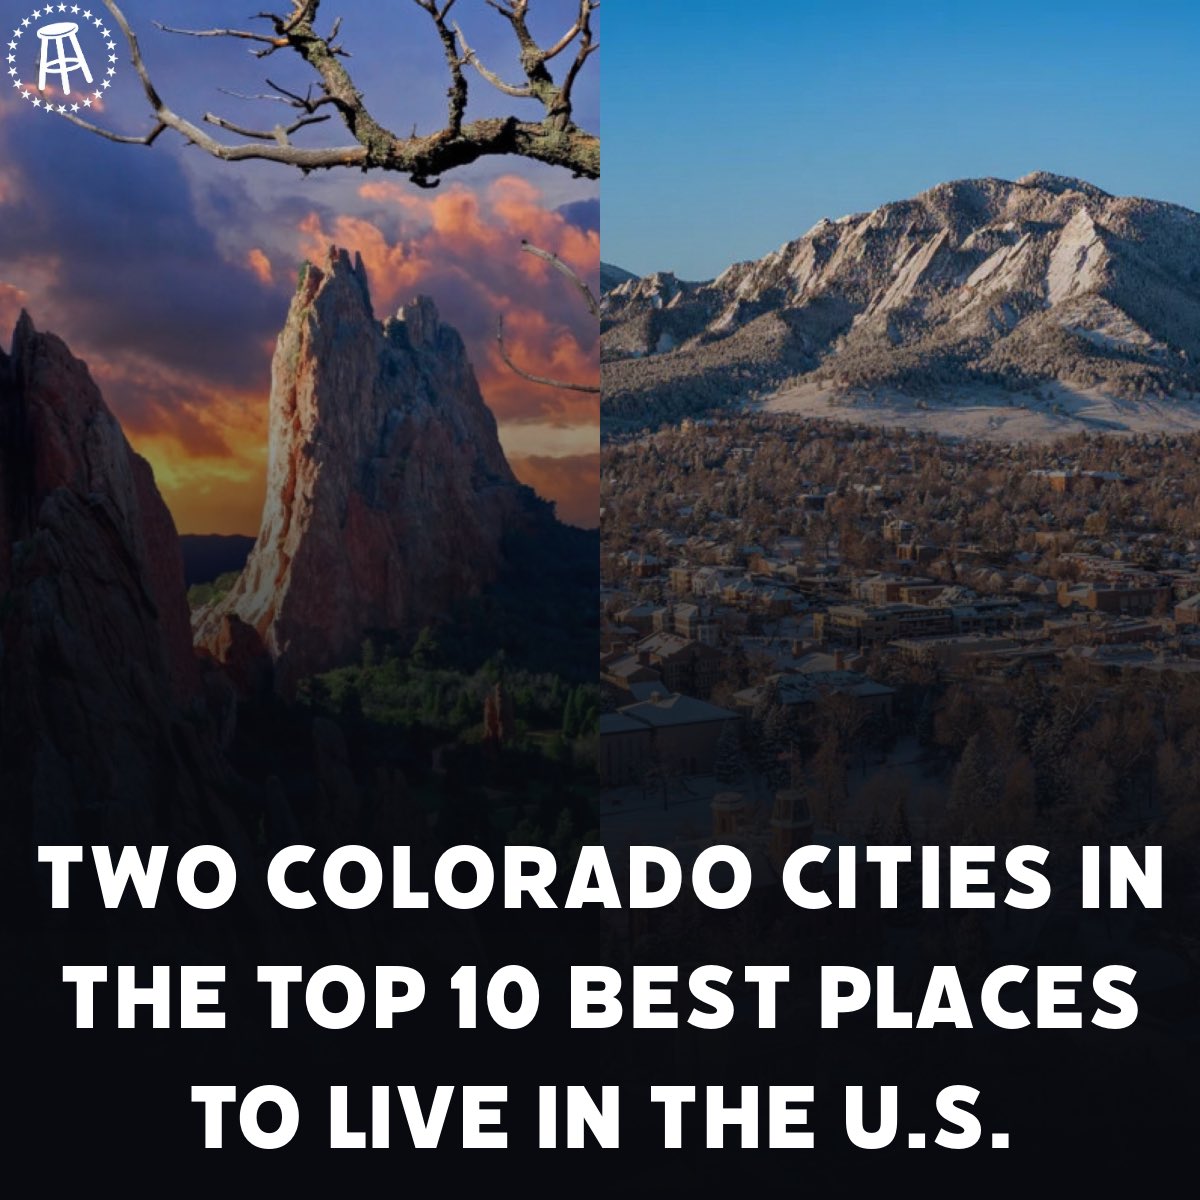 Best places to live in the U.S, per @usnews 

#3 - Colorado Springs, CO
#10 - Boulder, CO